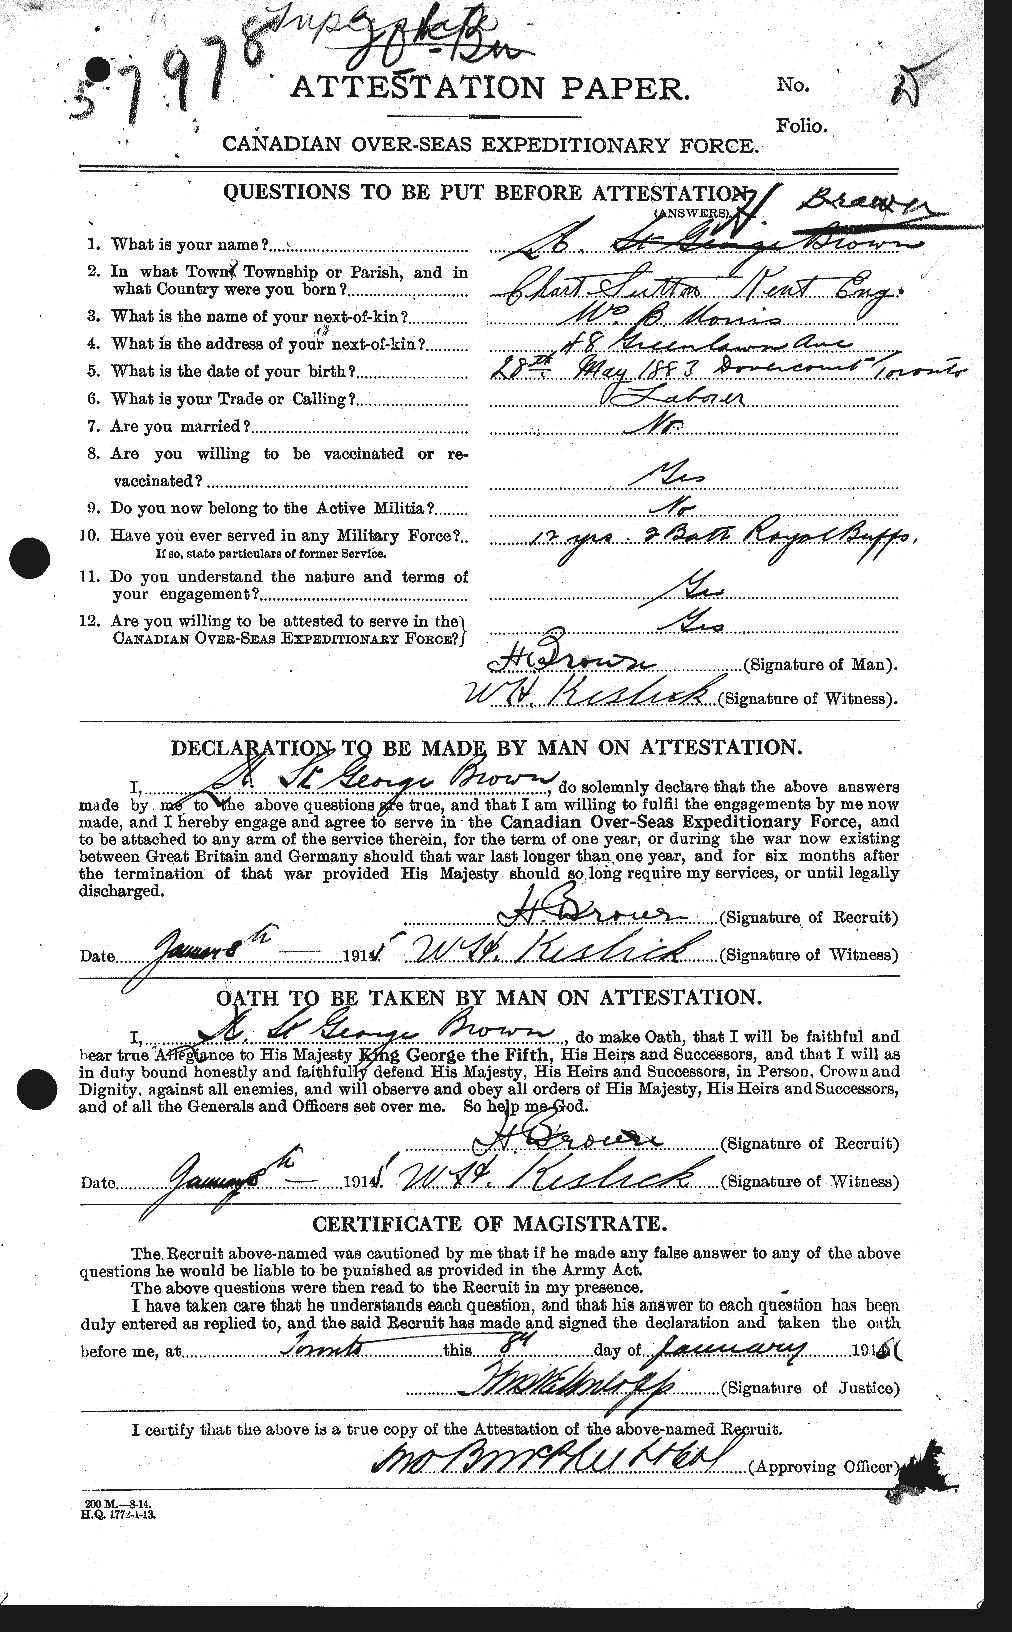 Personnel Records of the First World War - CEF 262662a